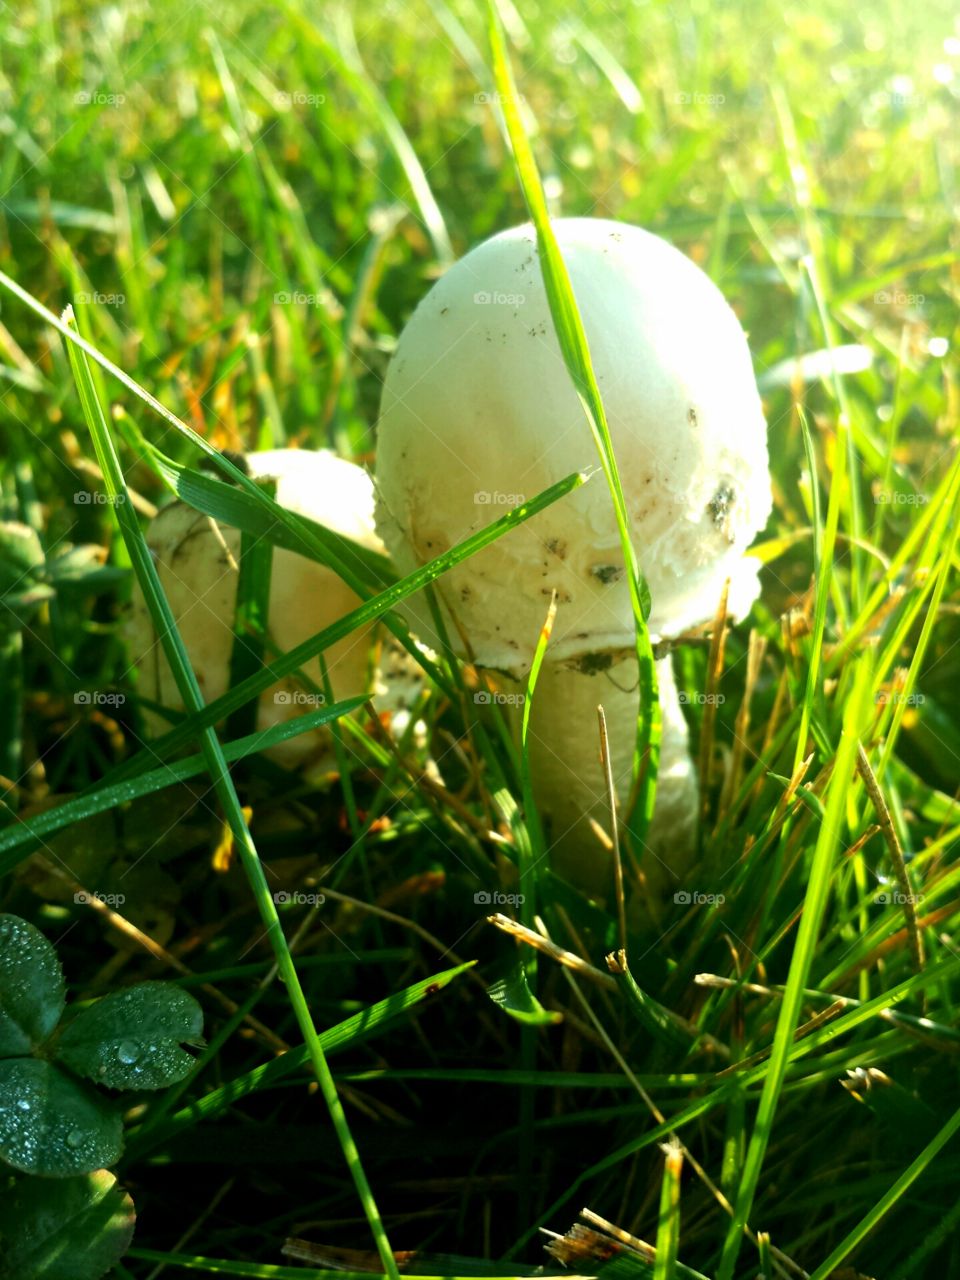 mushrooms and clover